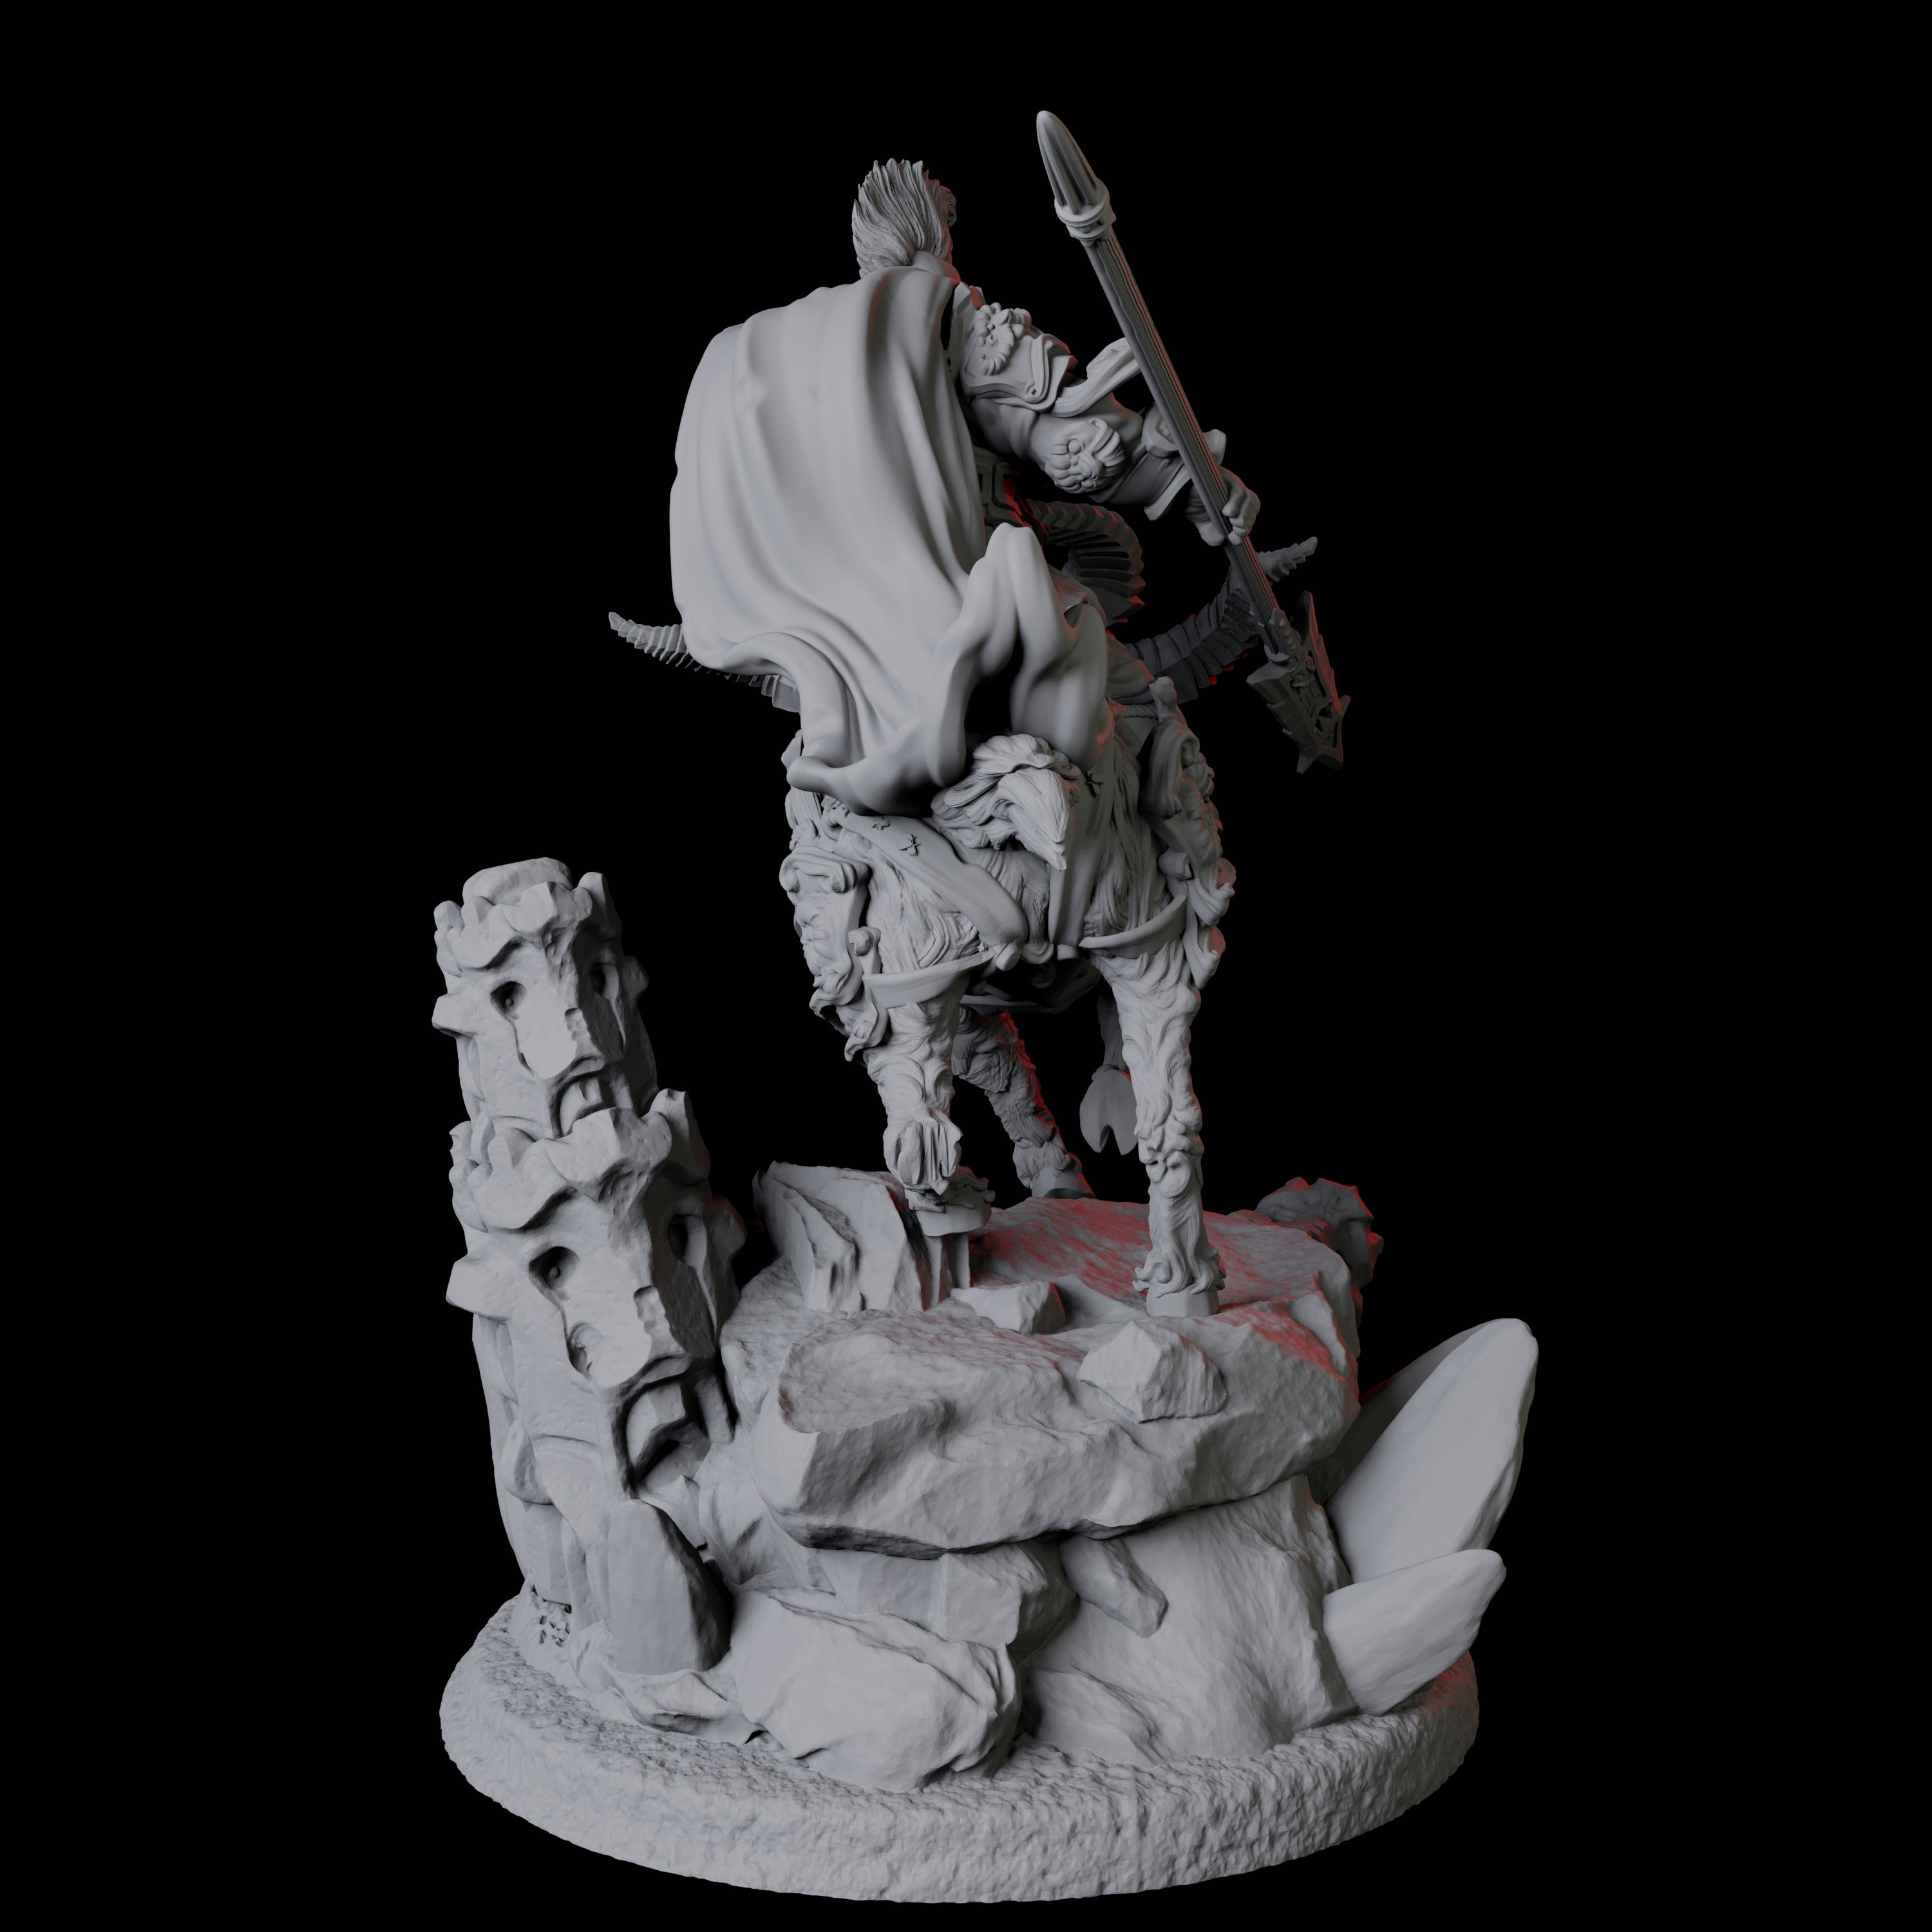 Goat Mounted Dwarf Warrior C Miniature for Dungeons and Dragons, Pathfinder or other TTRPGs